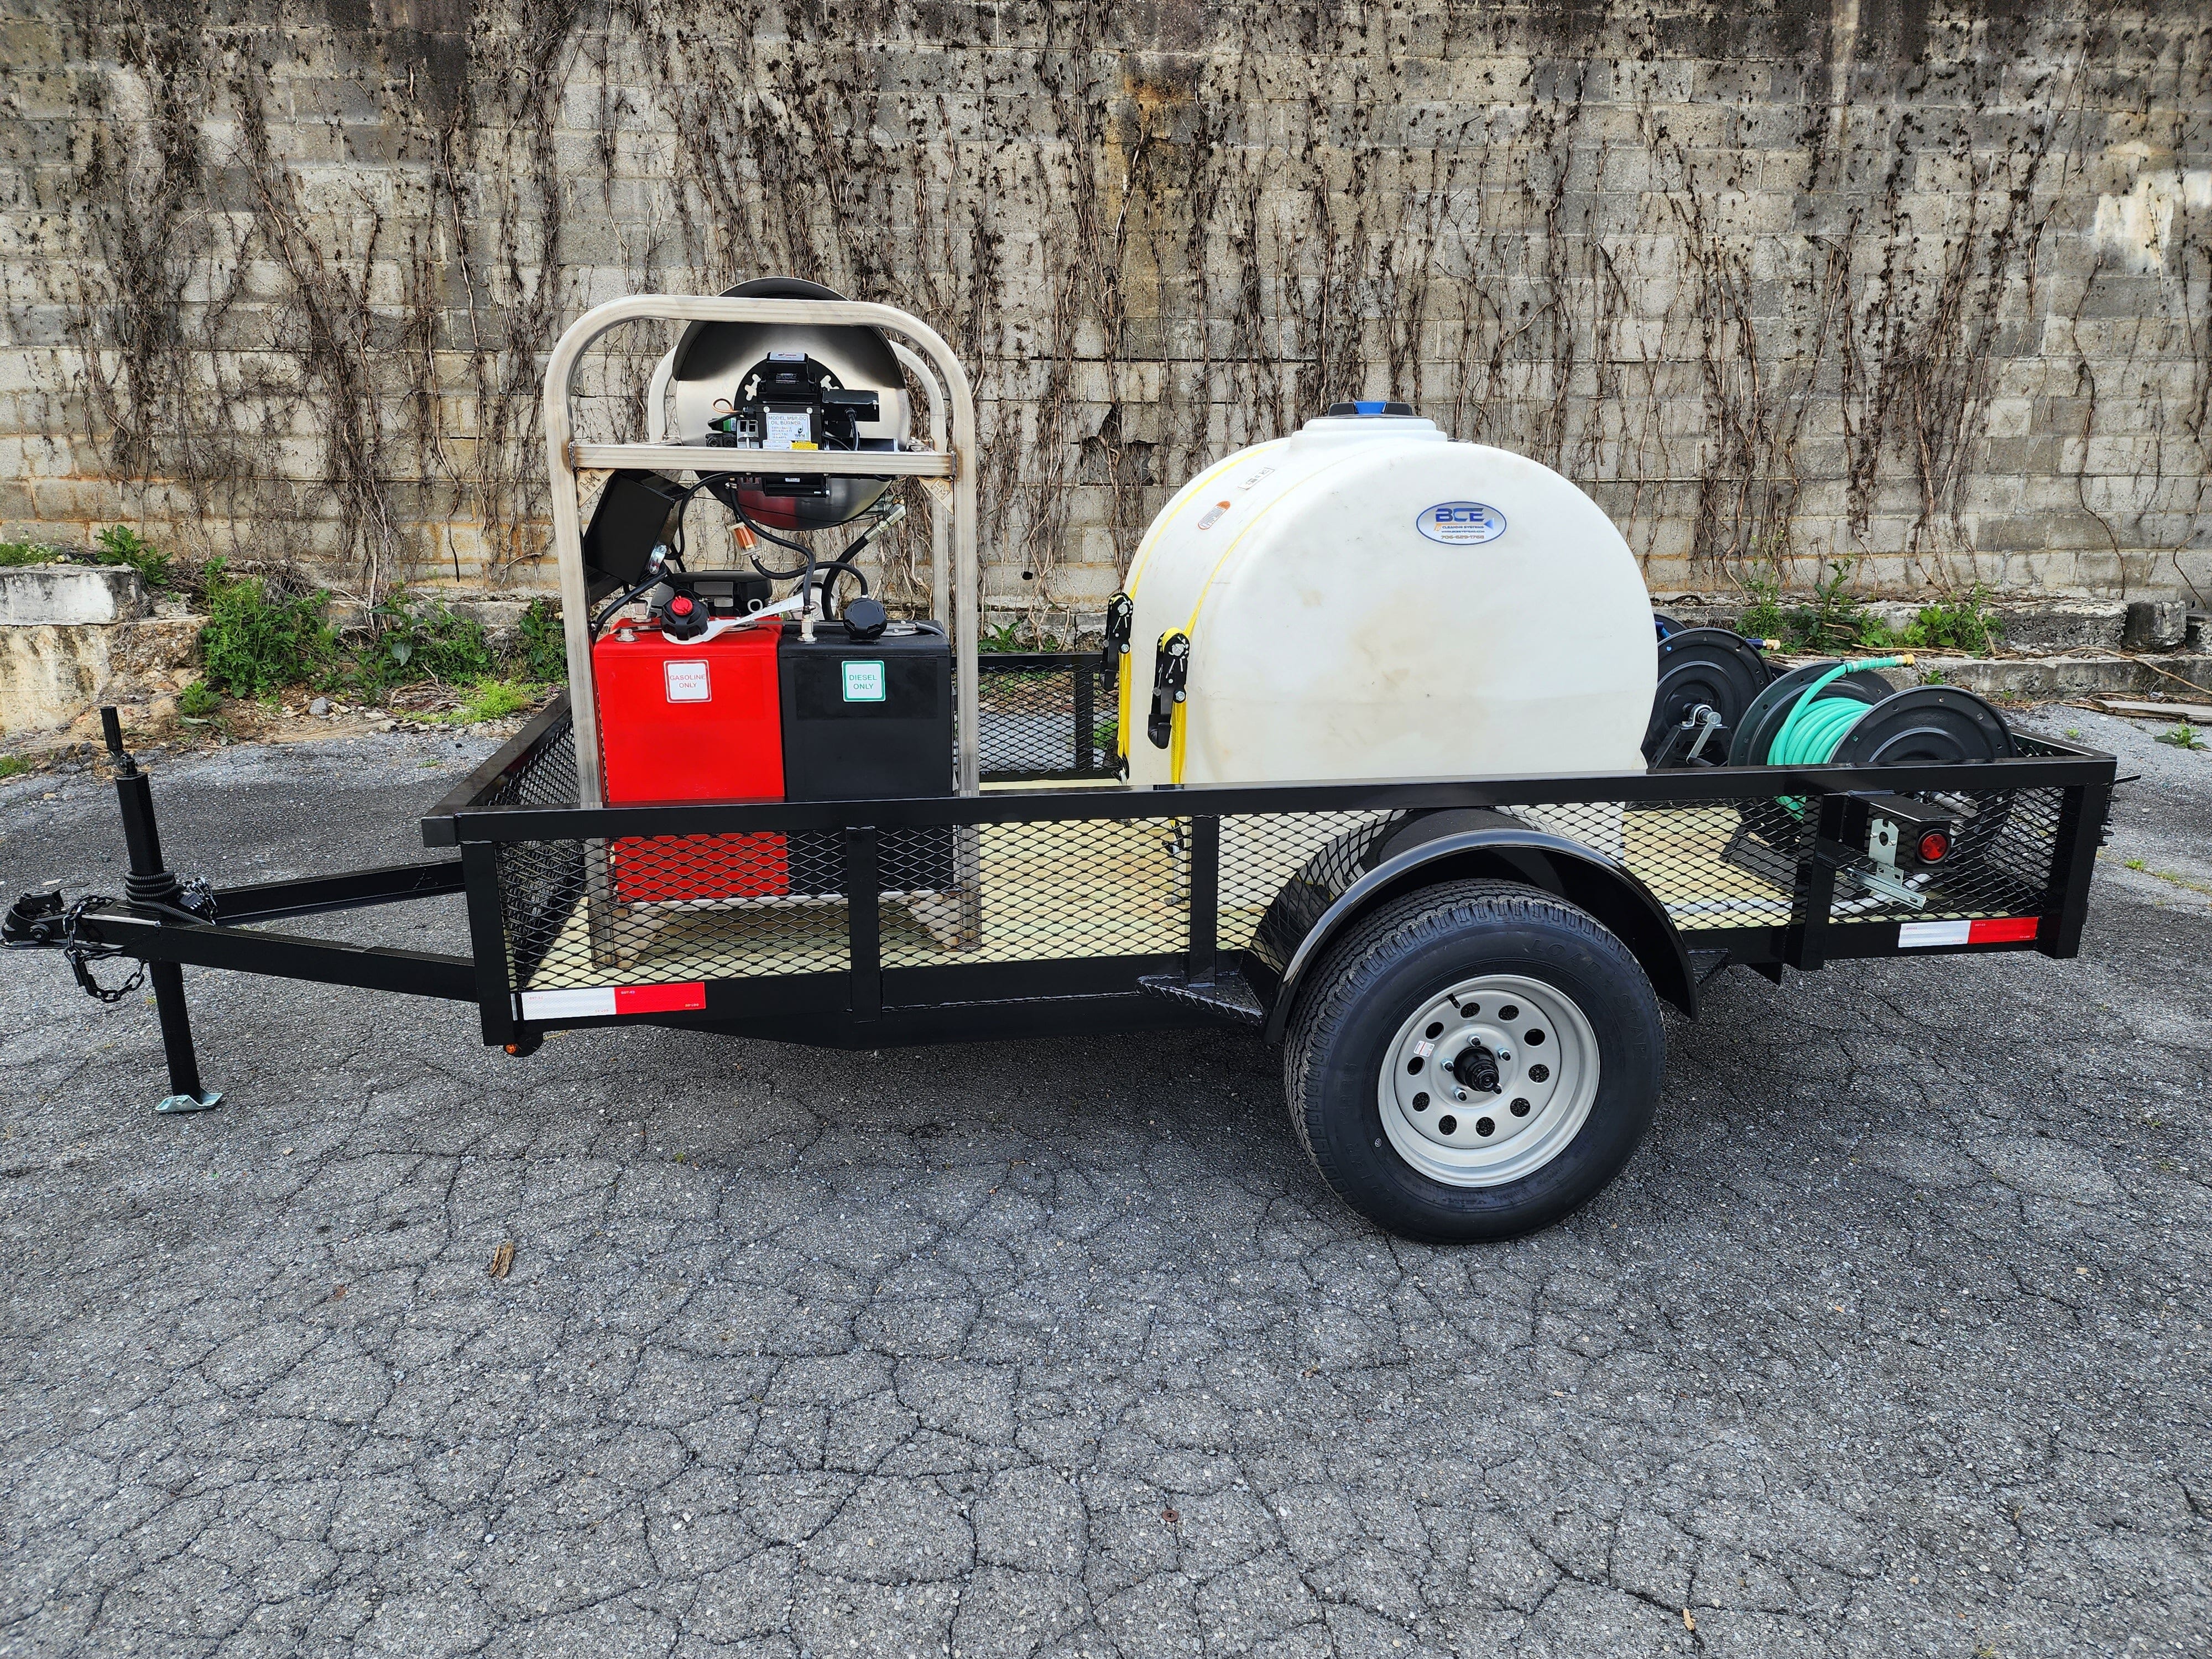 Hydro Max -6gpm at 4000psi Hot Water Trailer Package -Single Axle BCE Cleaning Systems 